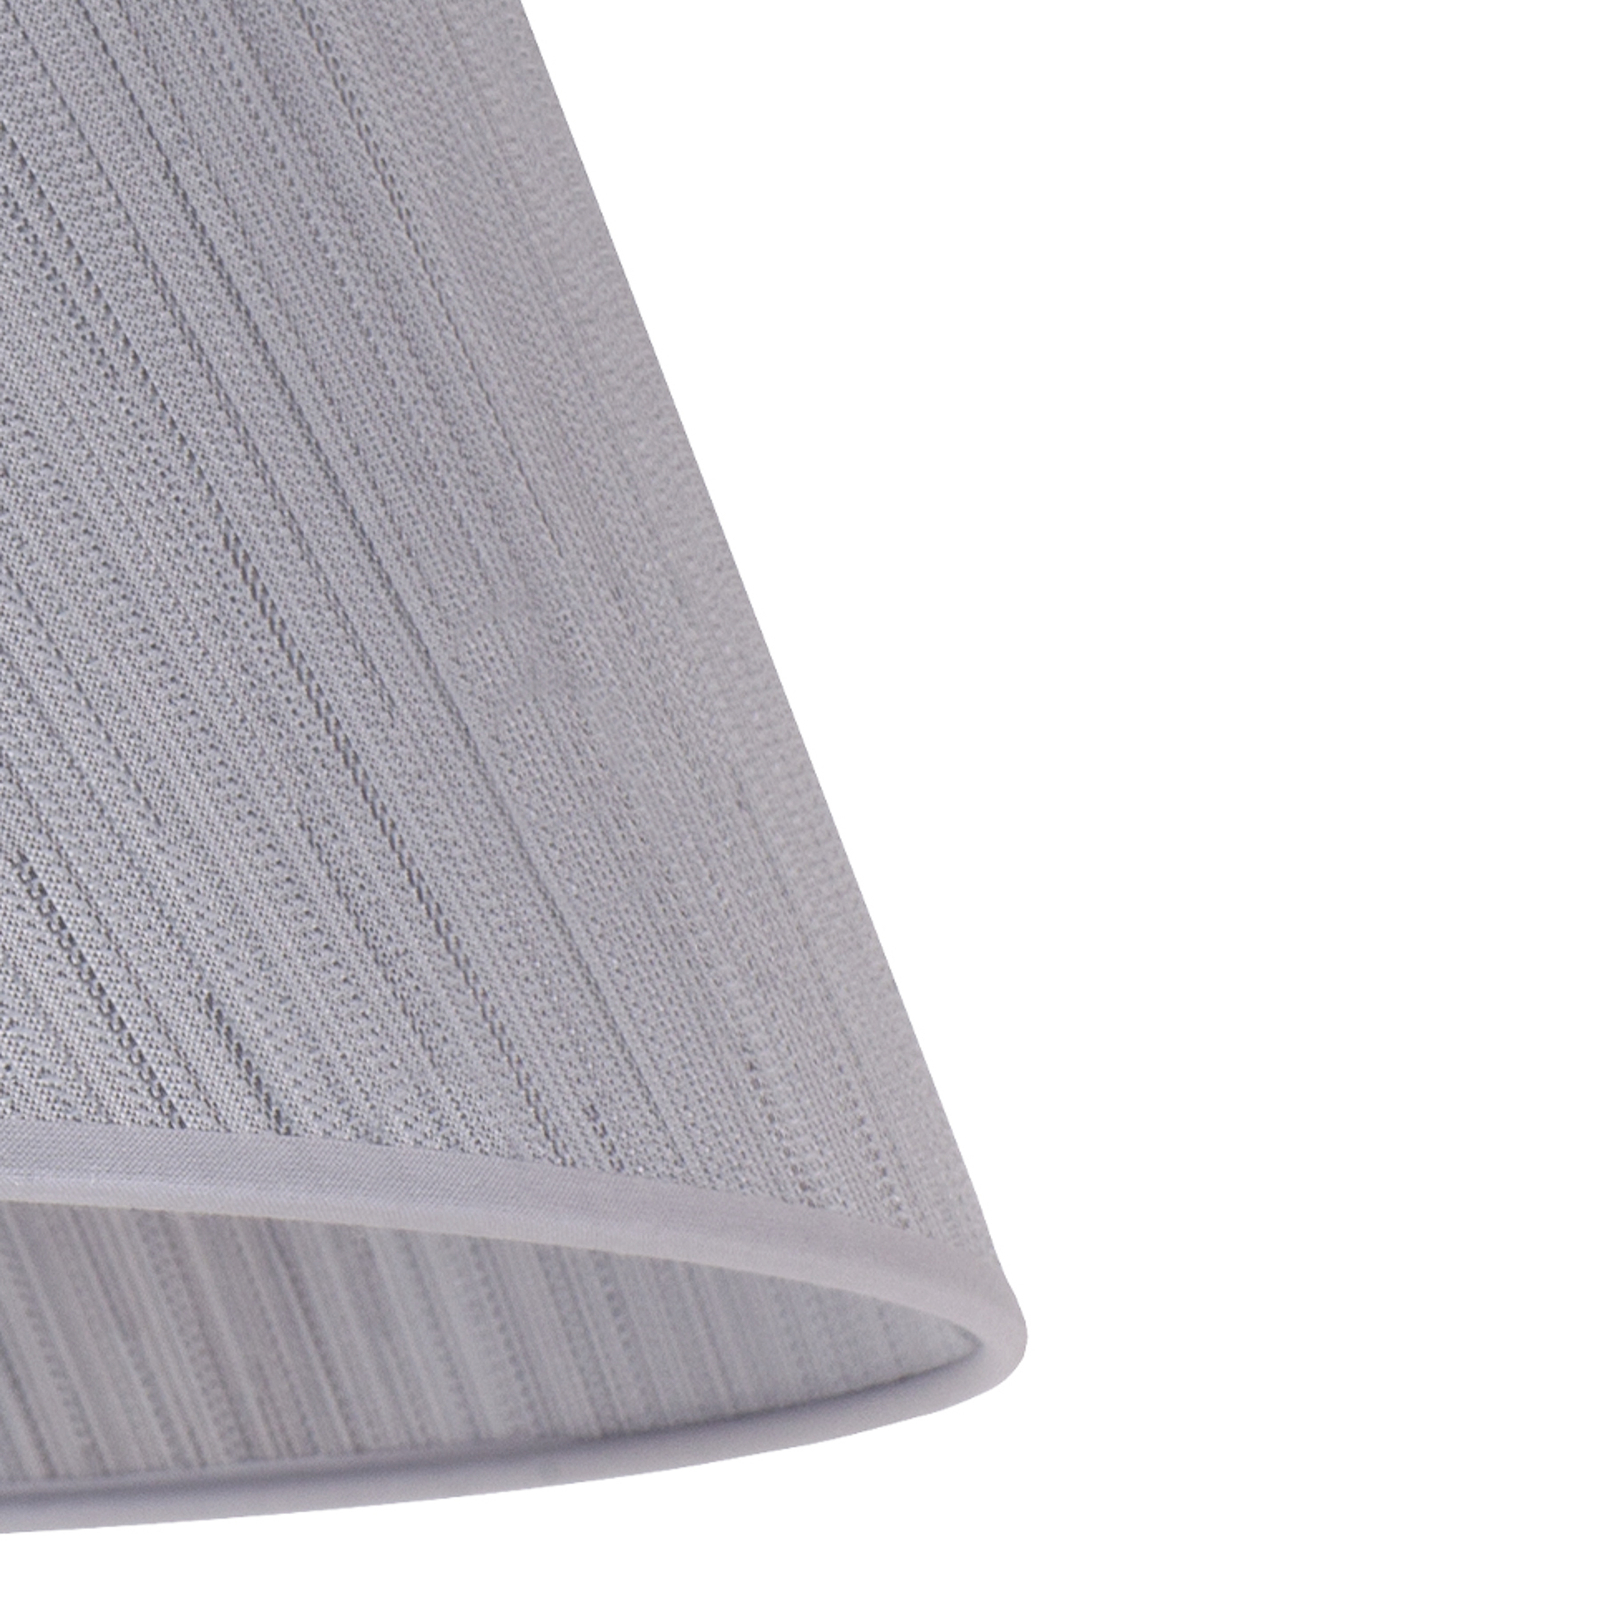 Sofia lampshade height 31 cm, silver striped